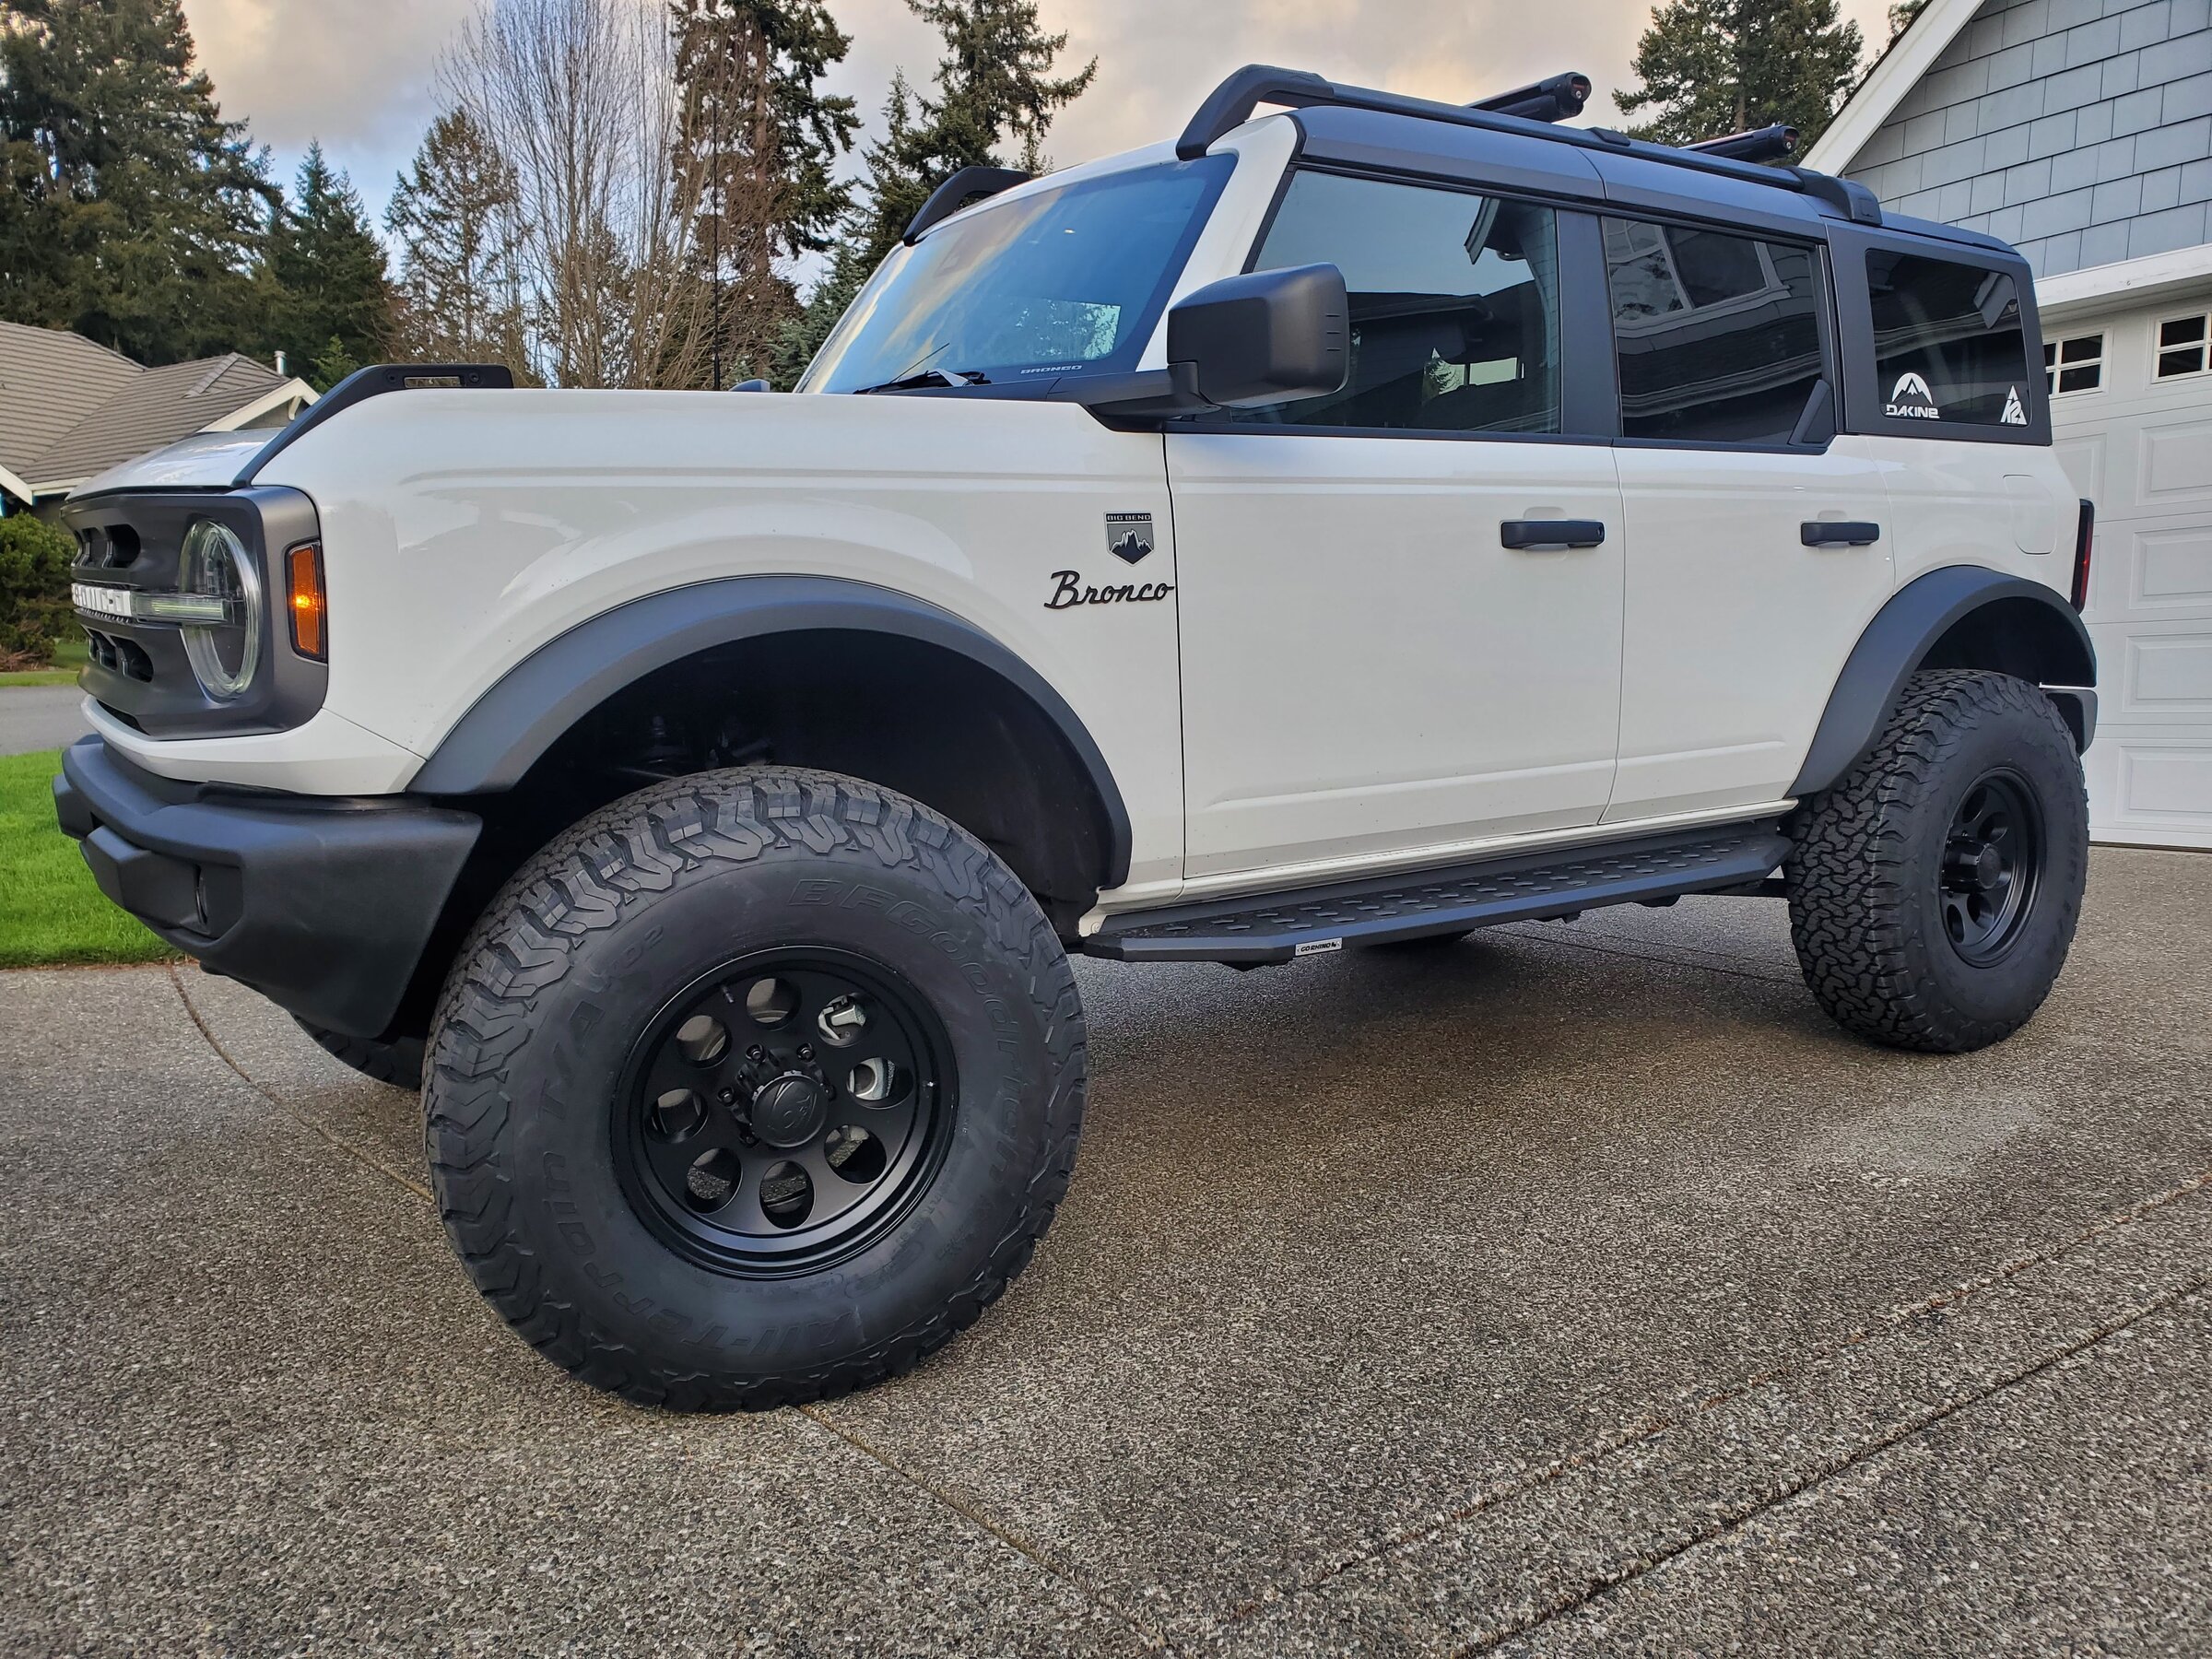 Ford Bronco Sasquatch fender flares before and after 20220411_191634